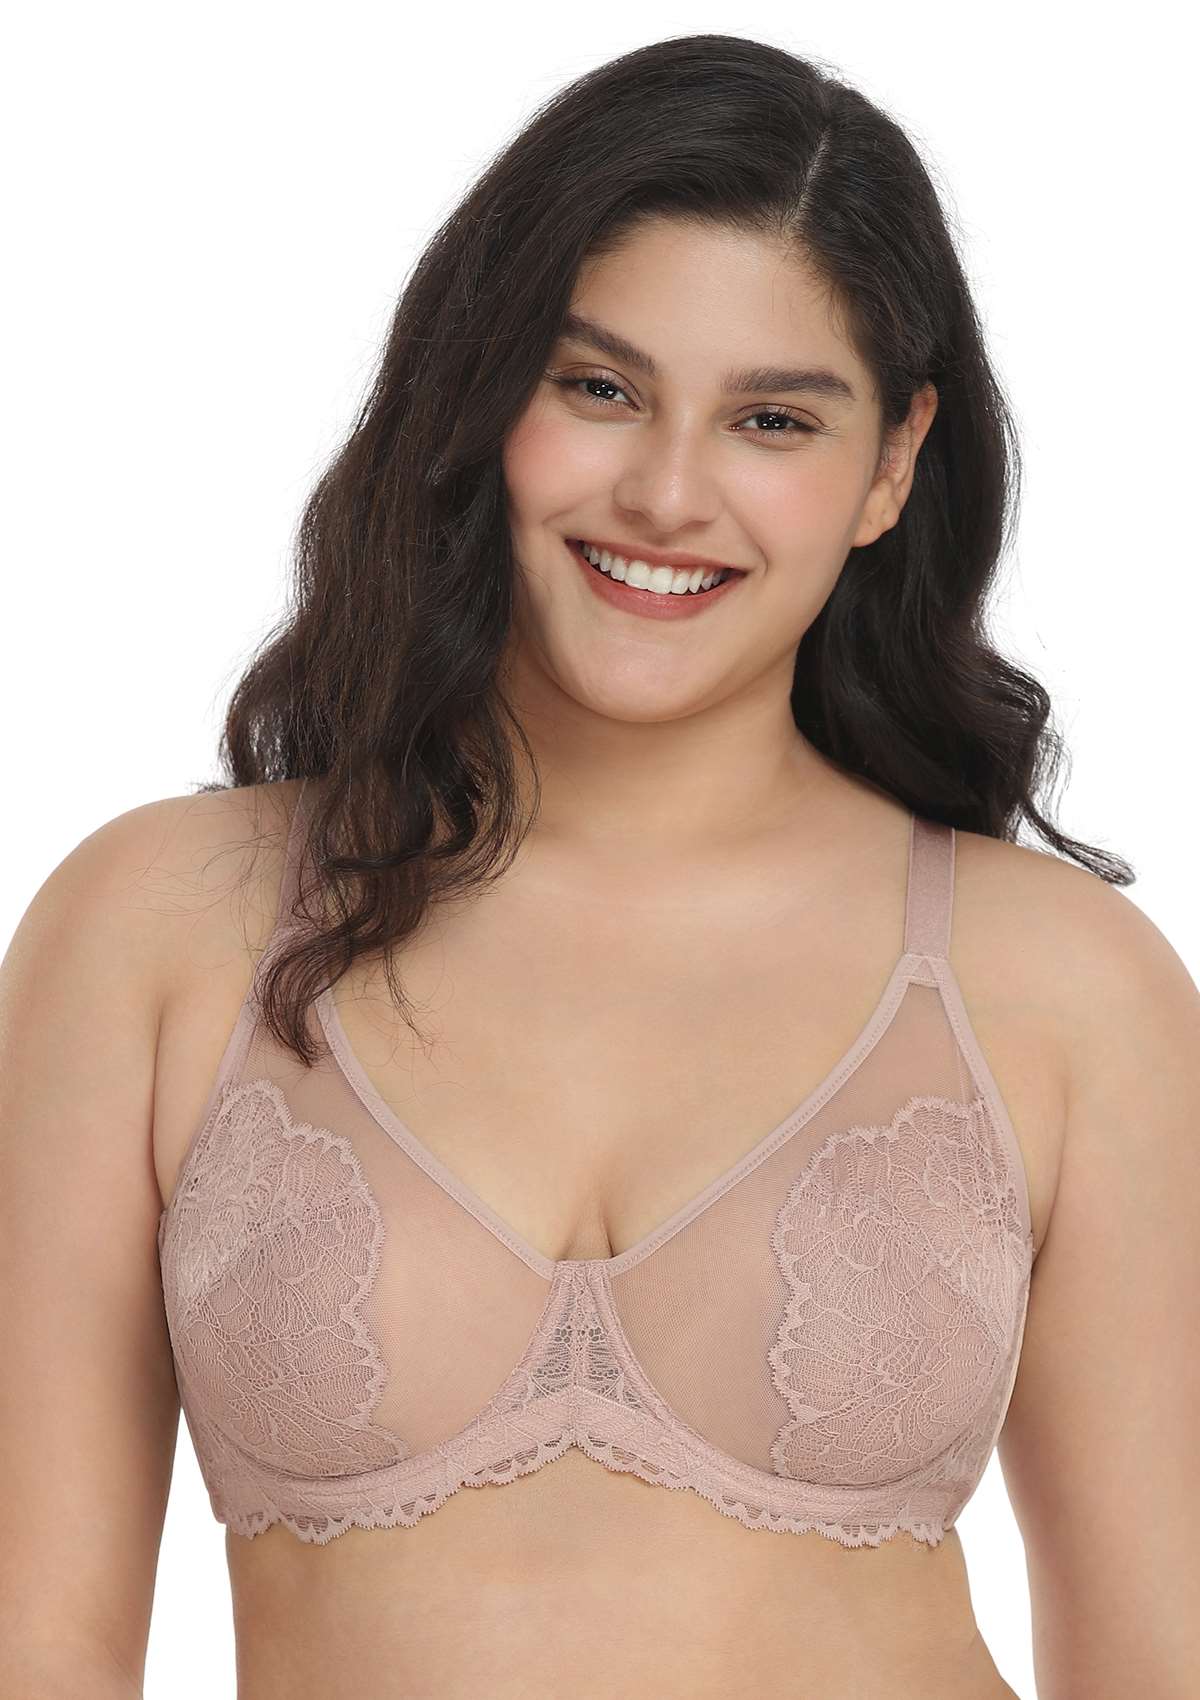 HSIA Blossom Lace Bra And Panties Set: Best Bra For Large Busts - Dark Pink / 34 / D